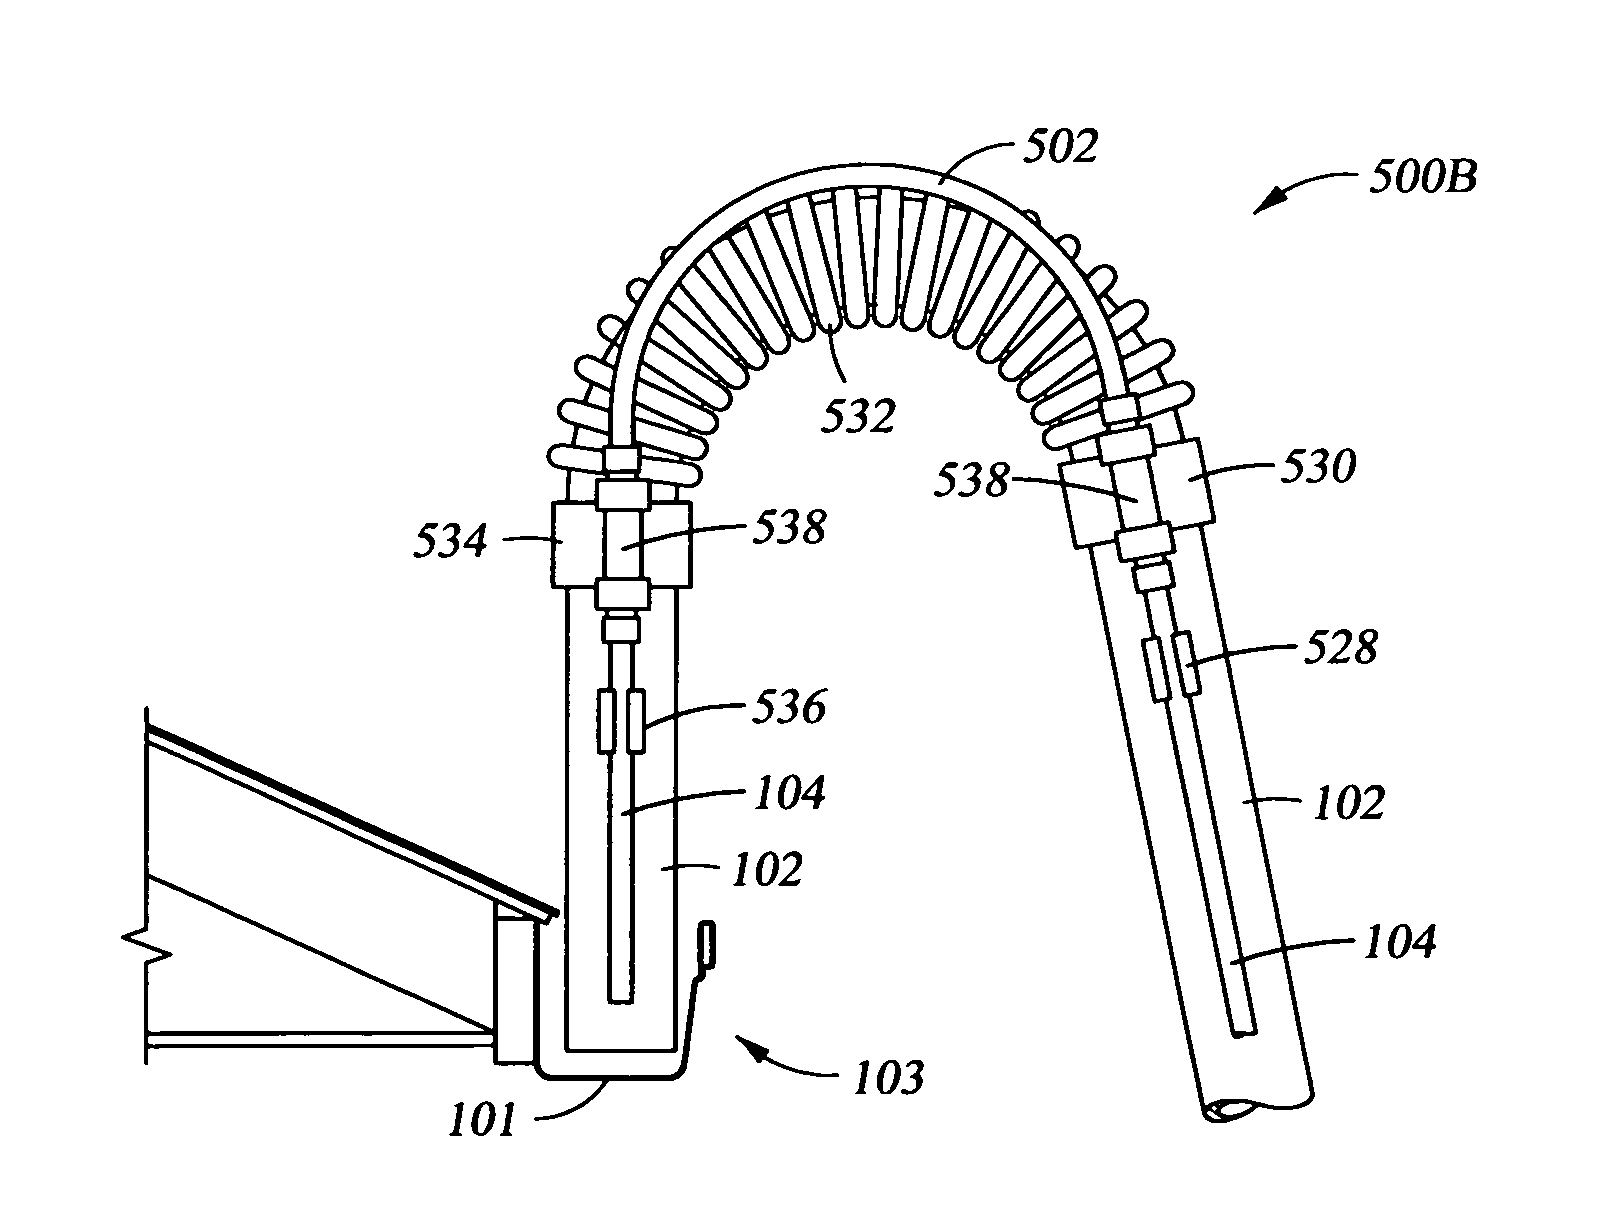 Apparatus for removing debris from gutters, troughs and other overhead open conduits